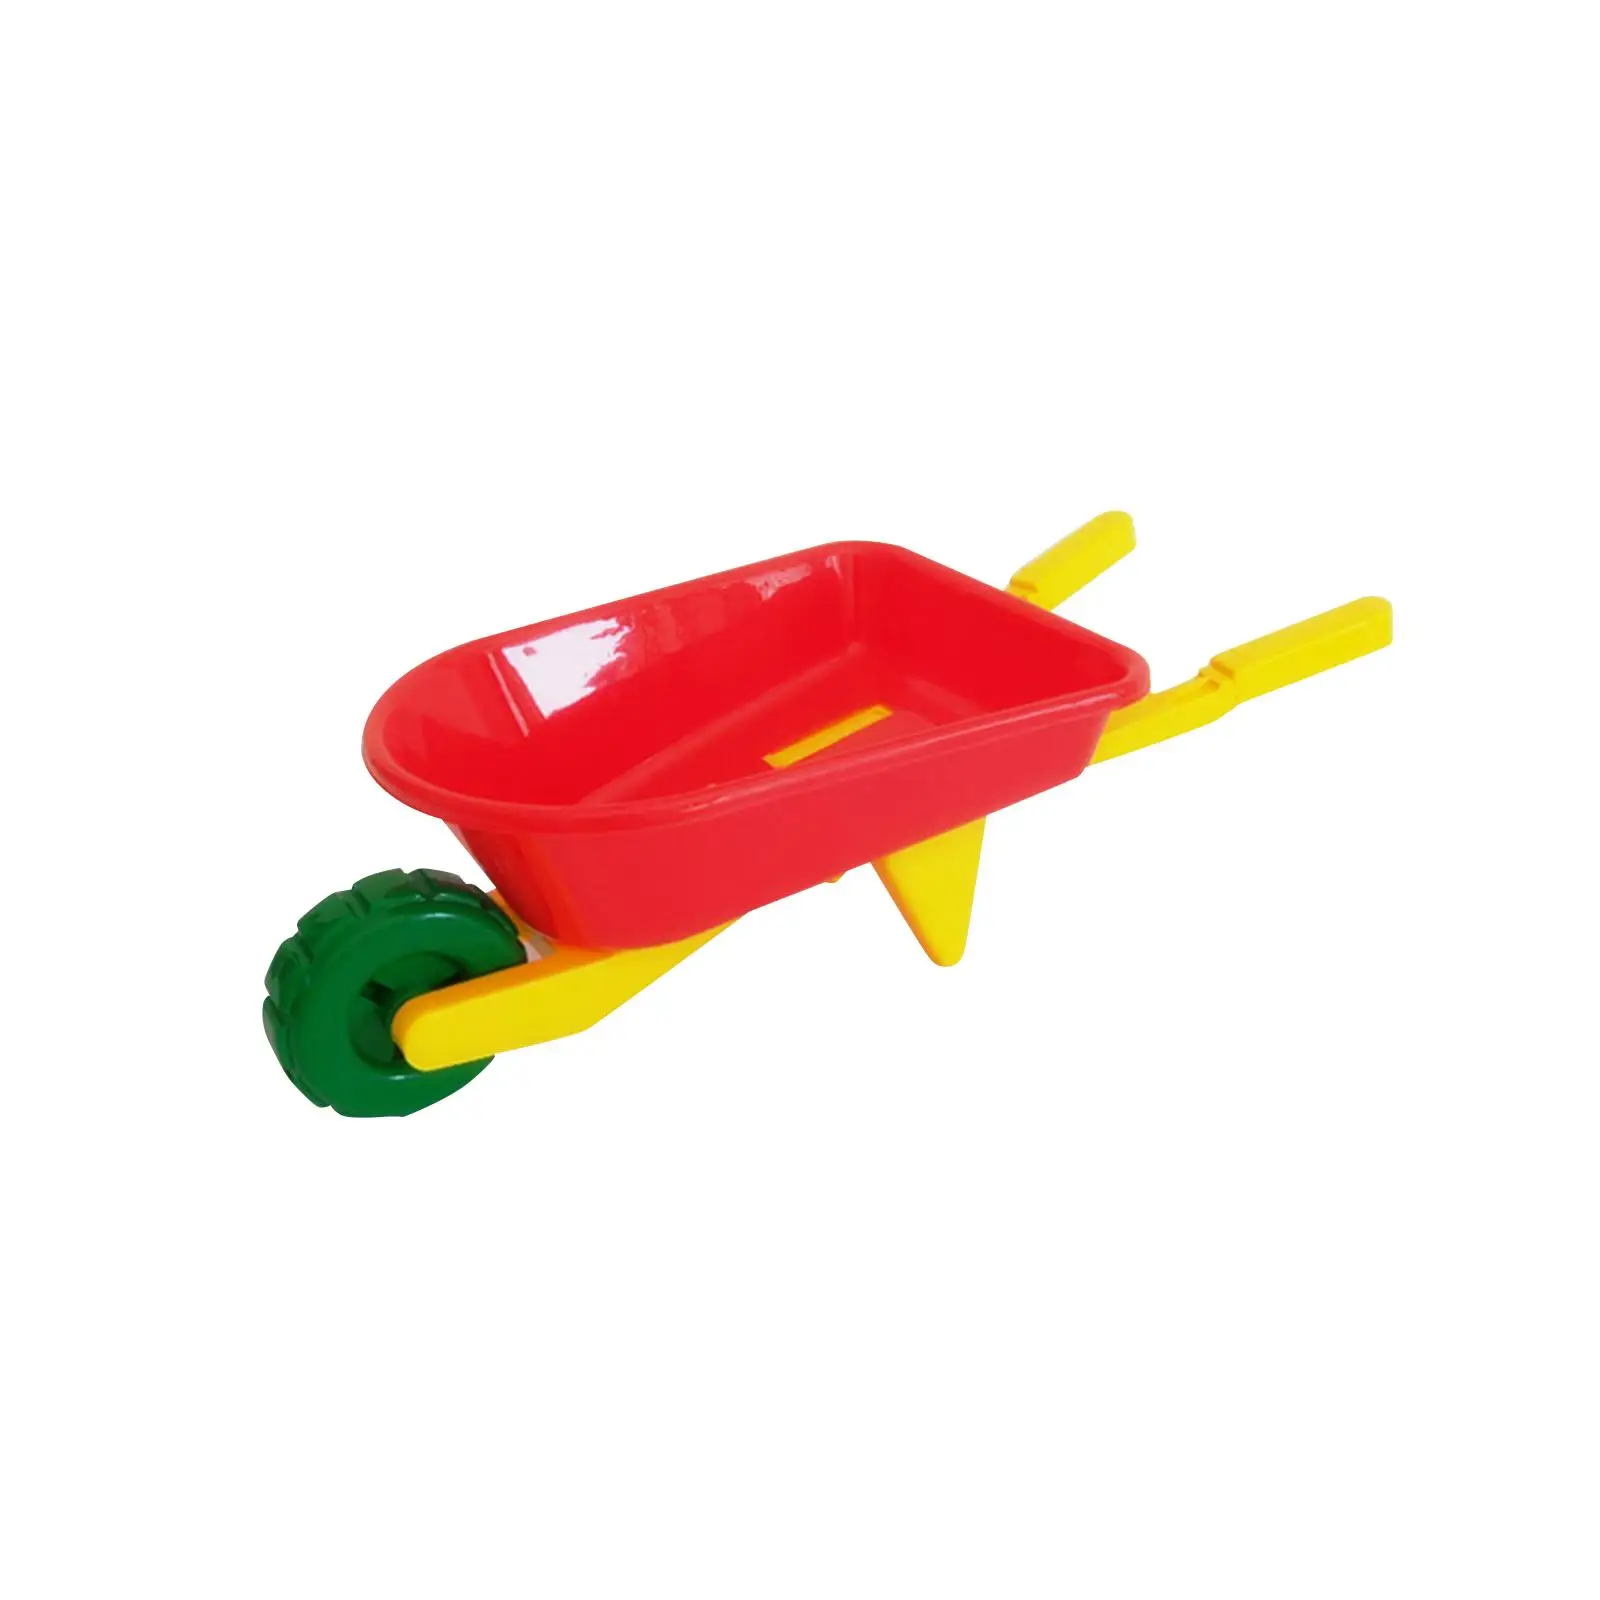 Sand Wheelbarrow Kids Play Sand Easy to Carry Kids Gardening Wagon for Ages 2 Years Old up Children Indoors and Outdoors